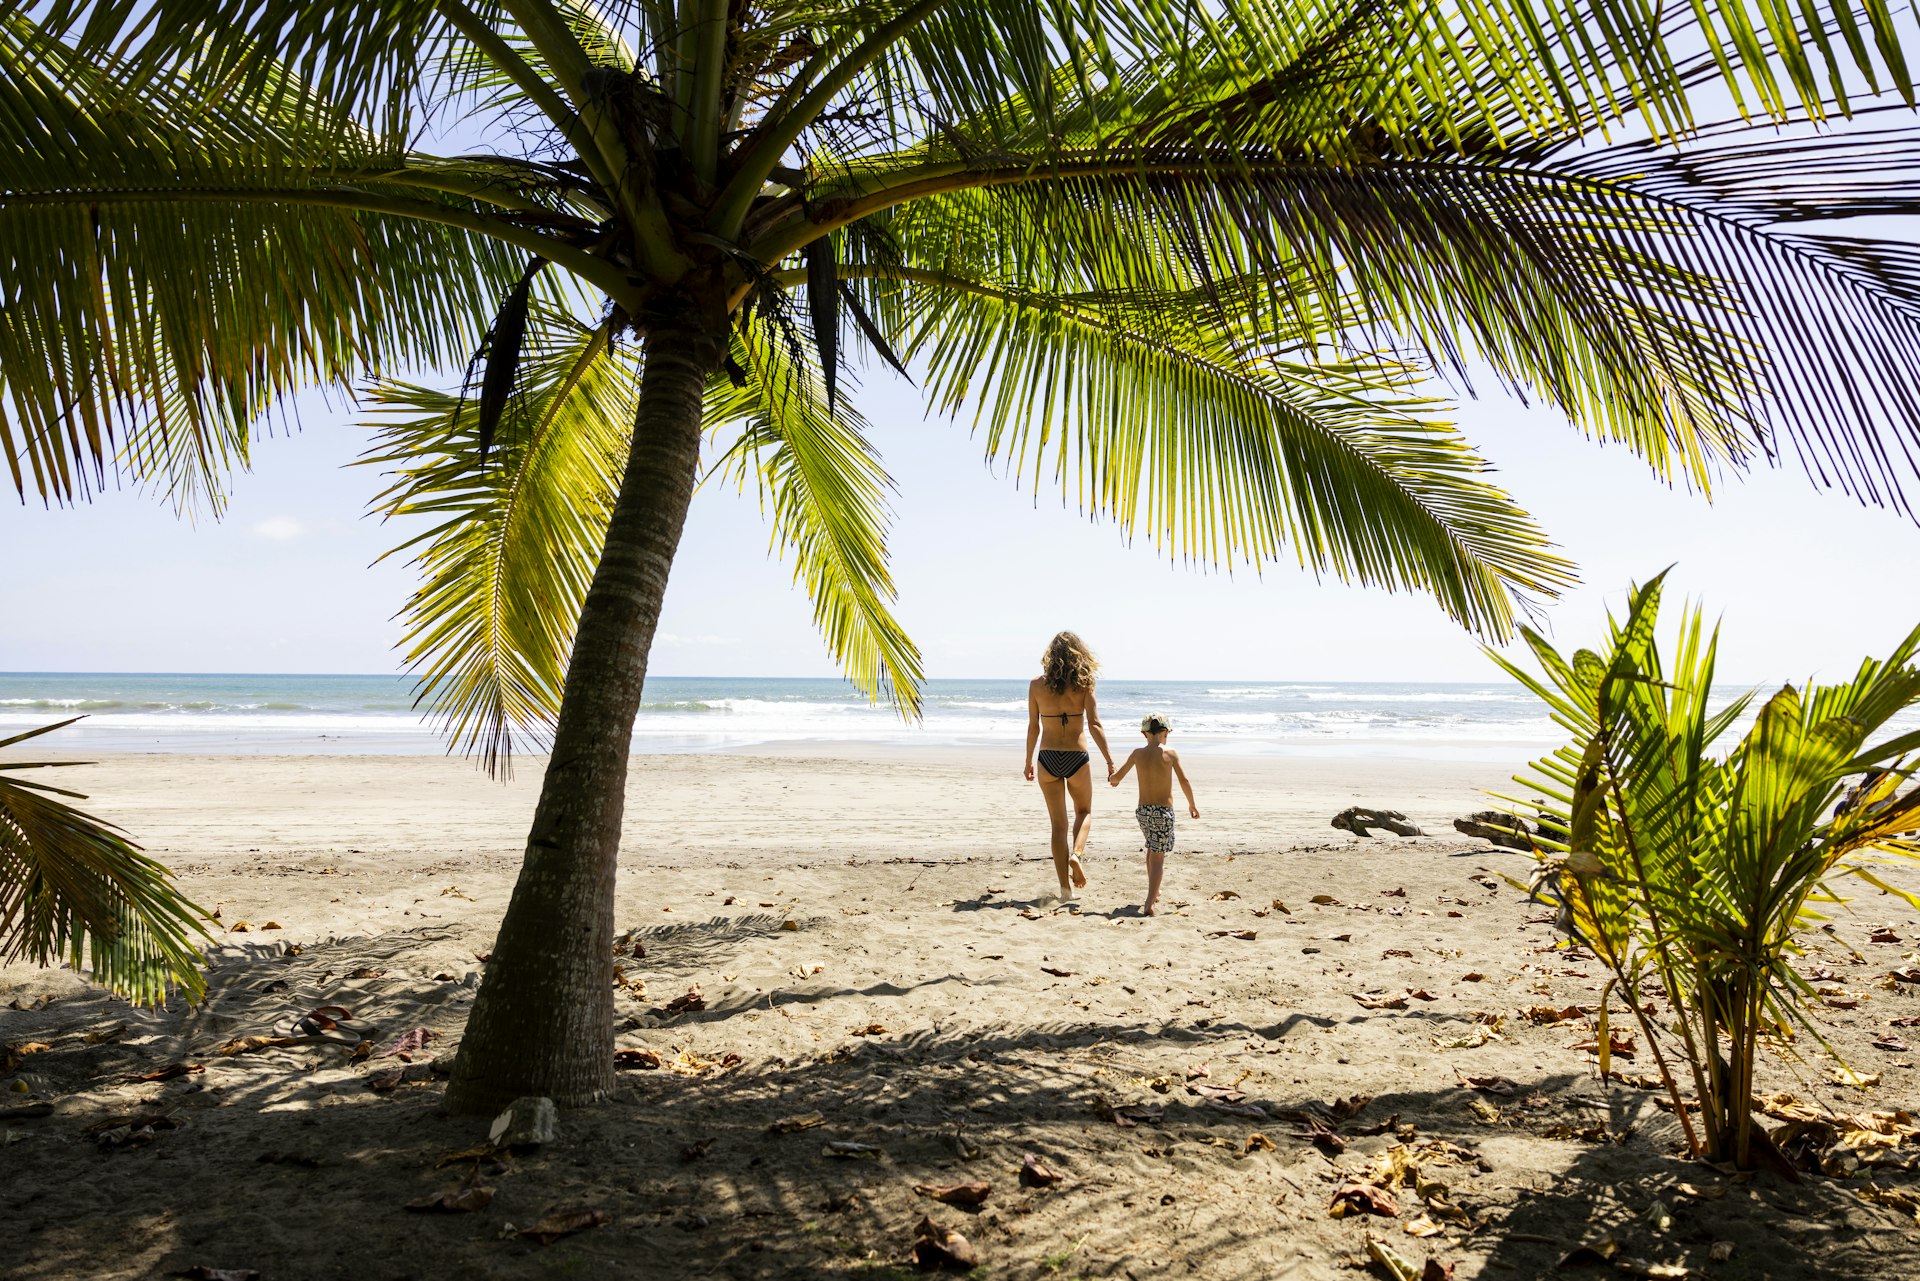 View from under palm tree of woman and child heading to the sea, Costa Rica